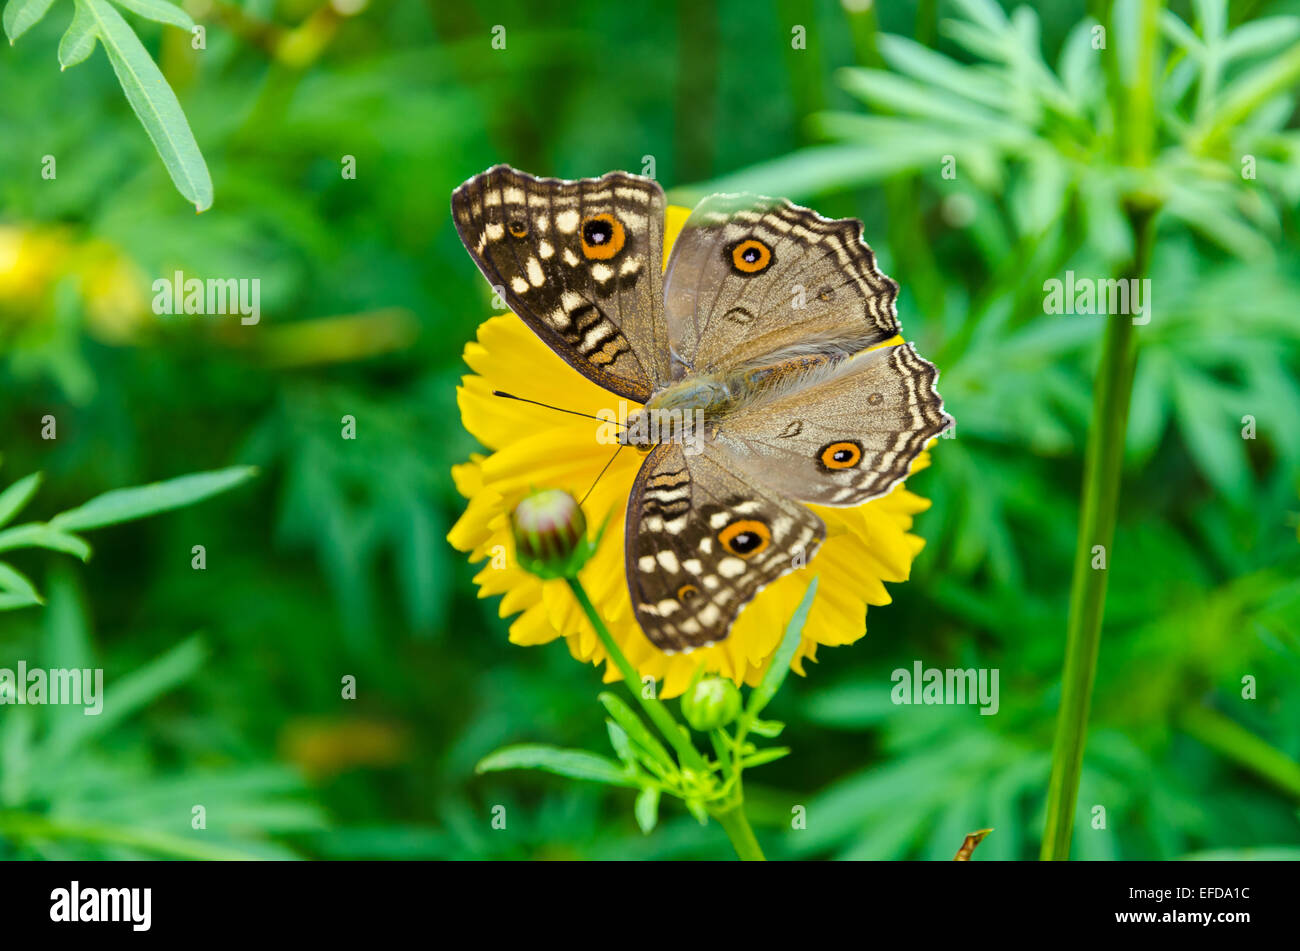 Close up top view Junonia Lemonias or Lemon Pansy, It is brown butterfly with large 'eye' spots on its wings Stock Photo